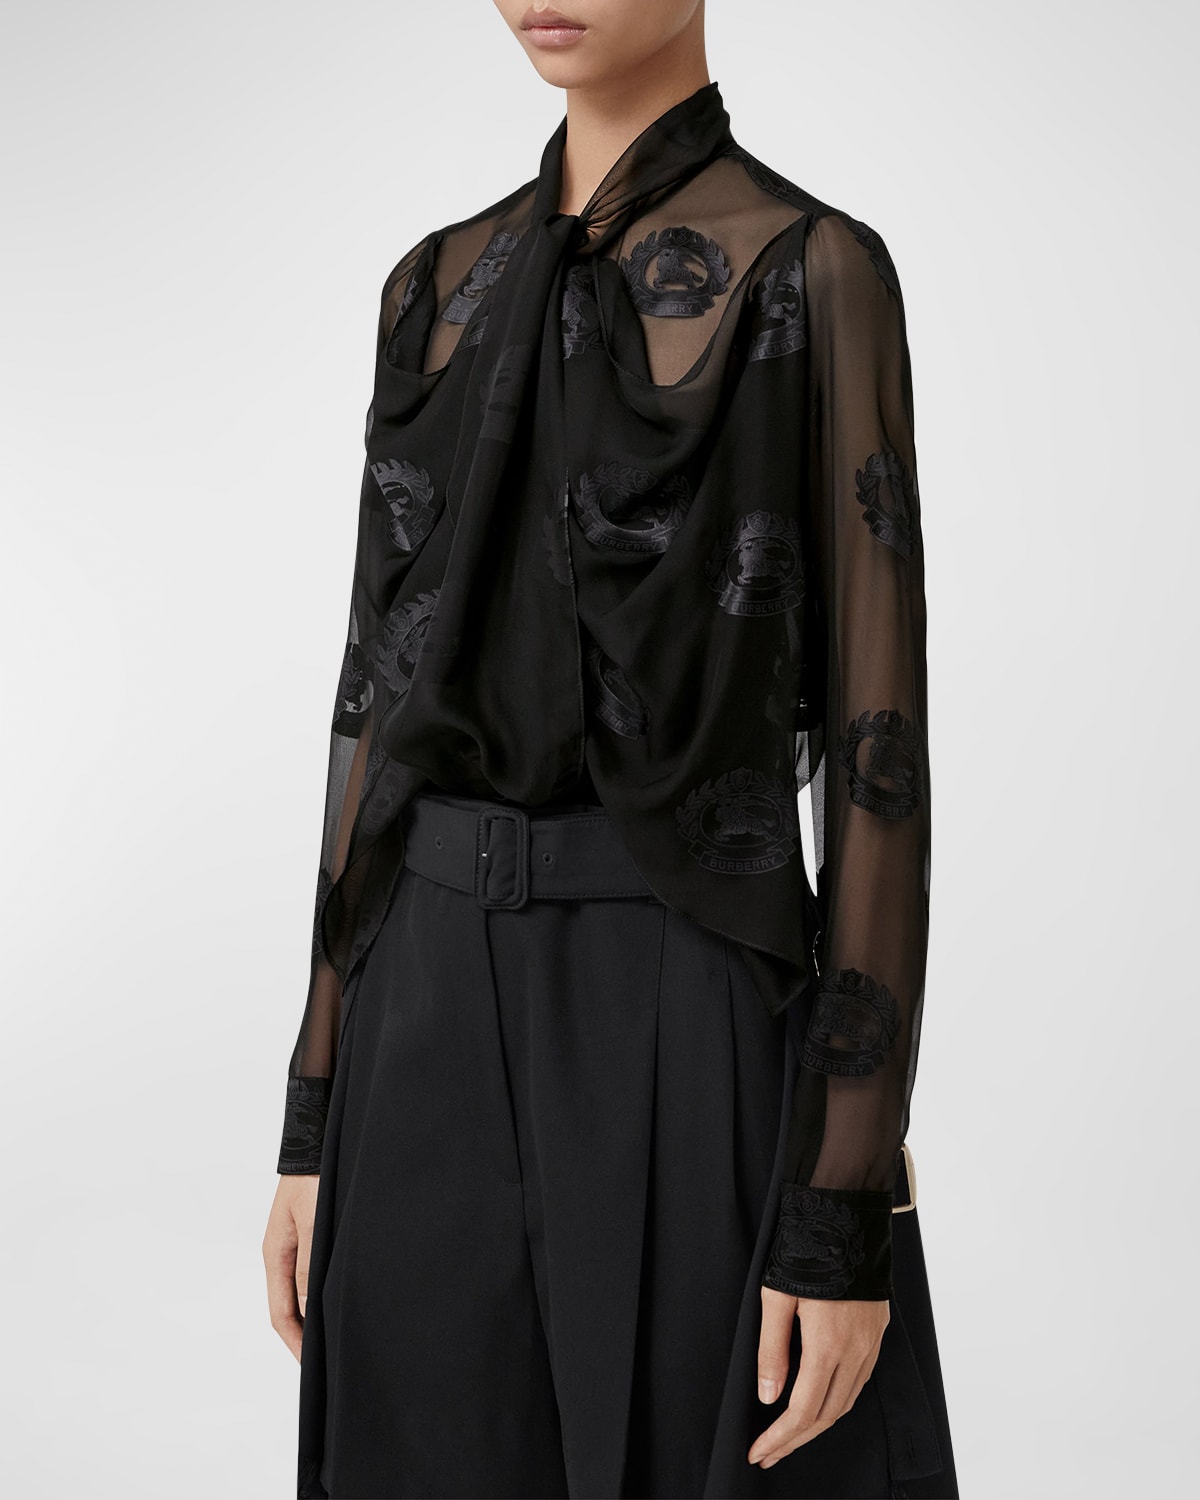 Womens Embroidered Blouse | Neiman Marcus